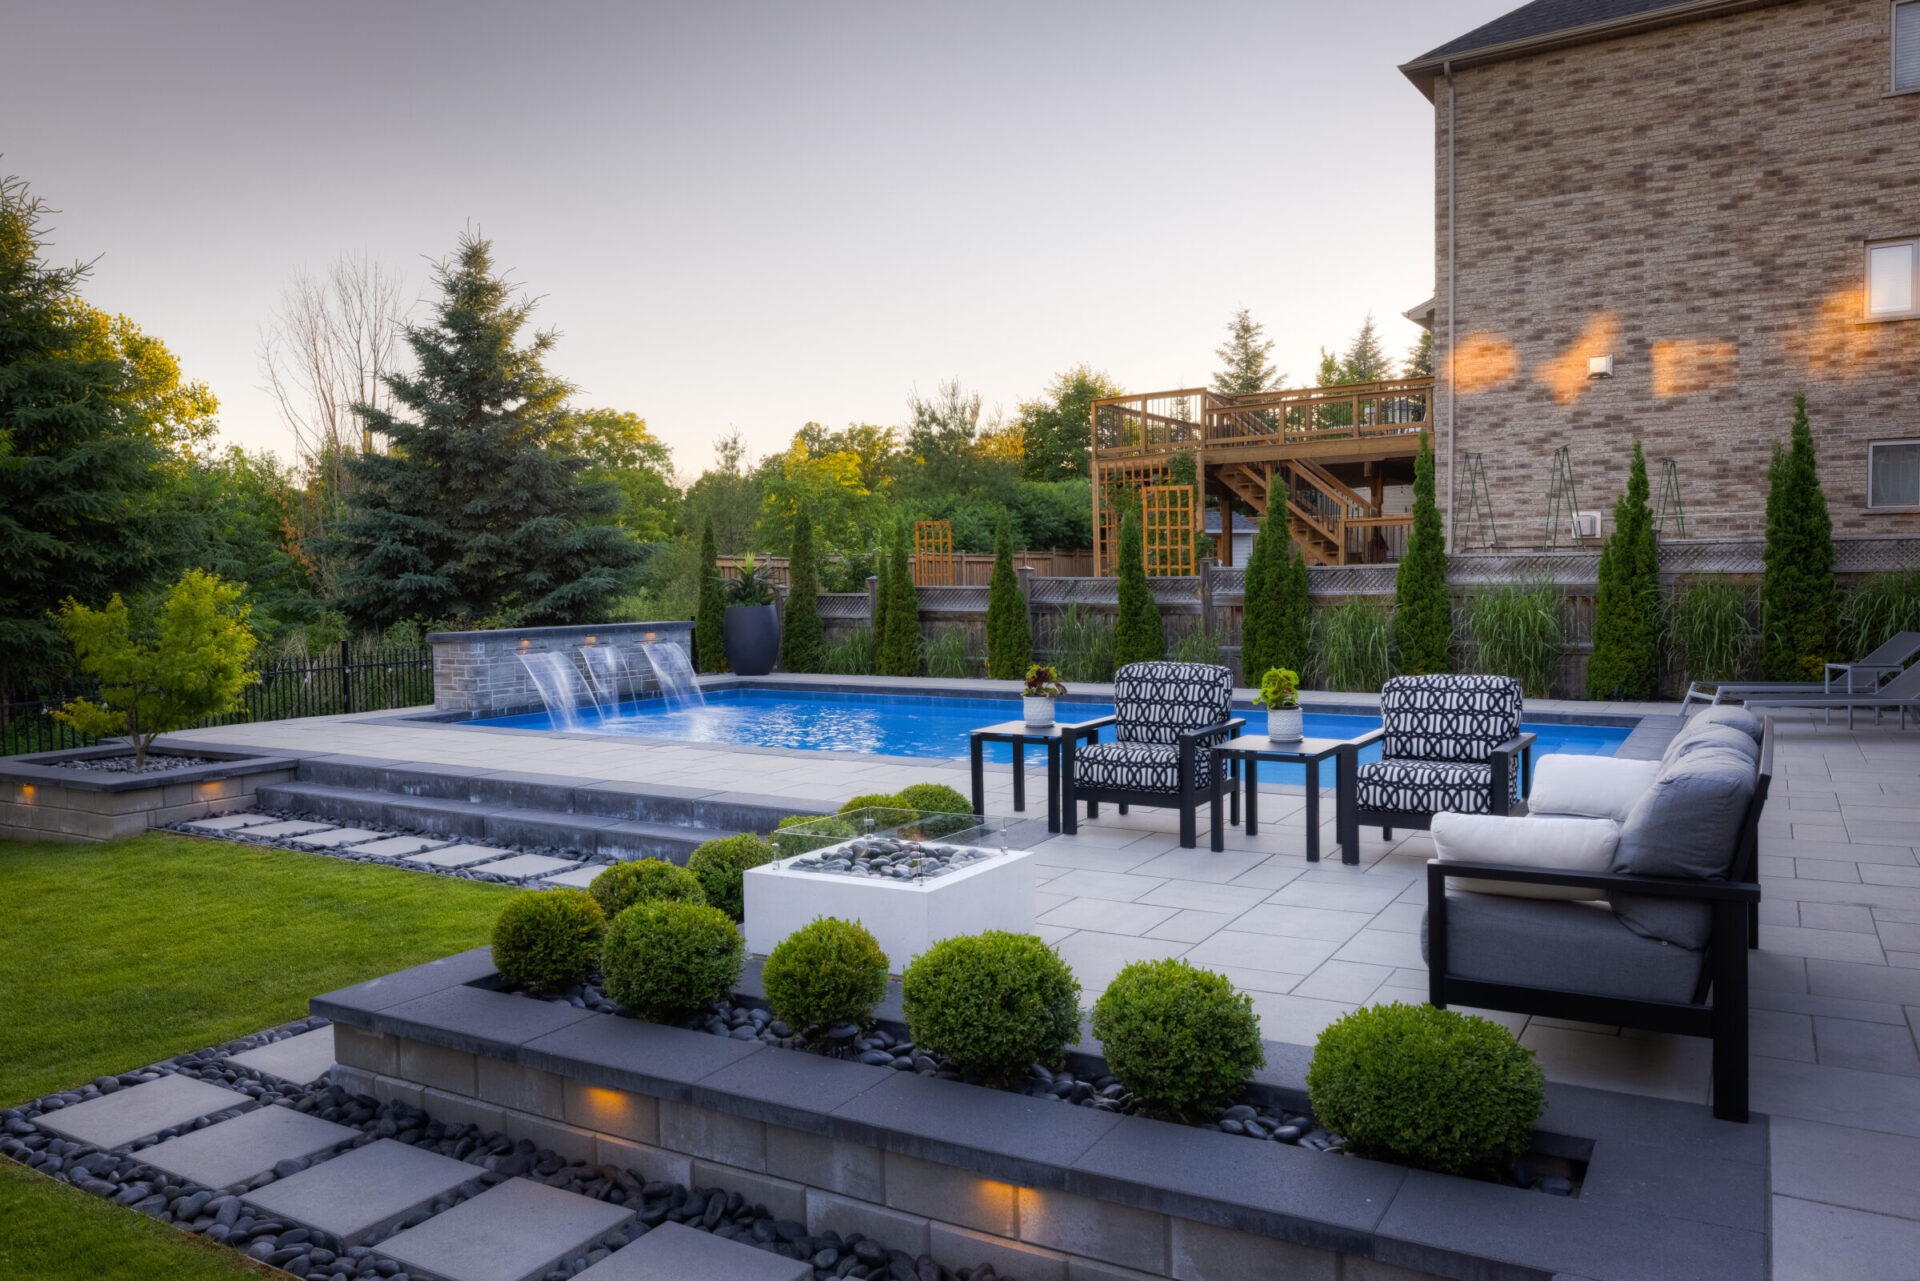 This image shows an elegant backyard with a swimming pool, waterfall feature, stylish outdoor furniture, manicured bushes, and a wooden deck.